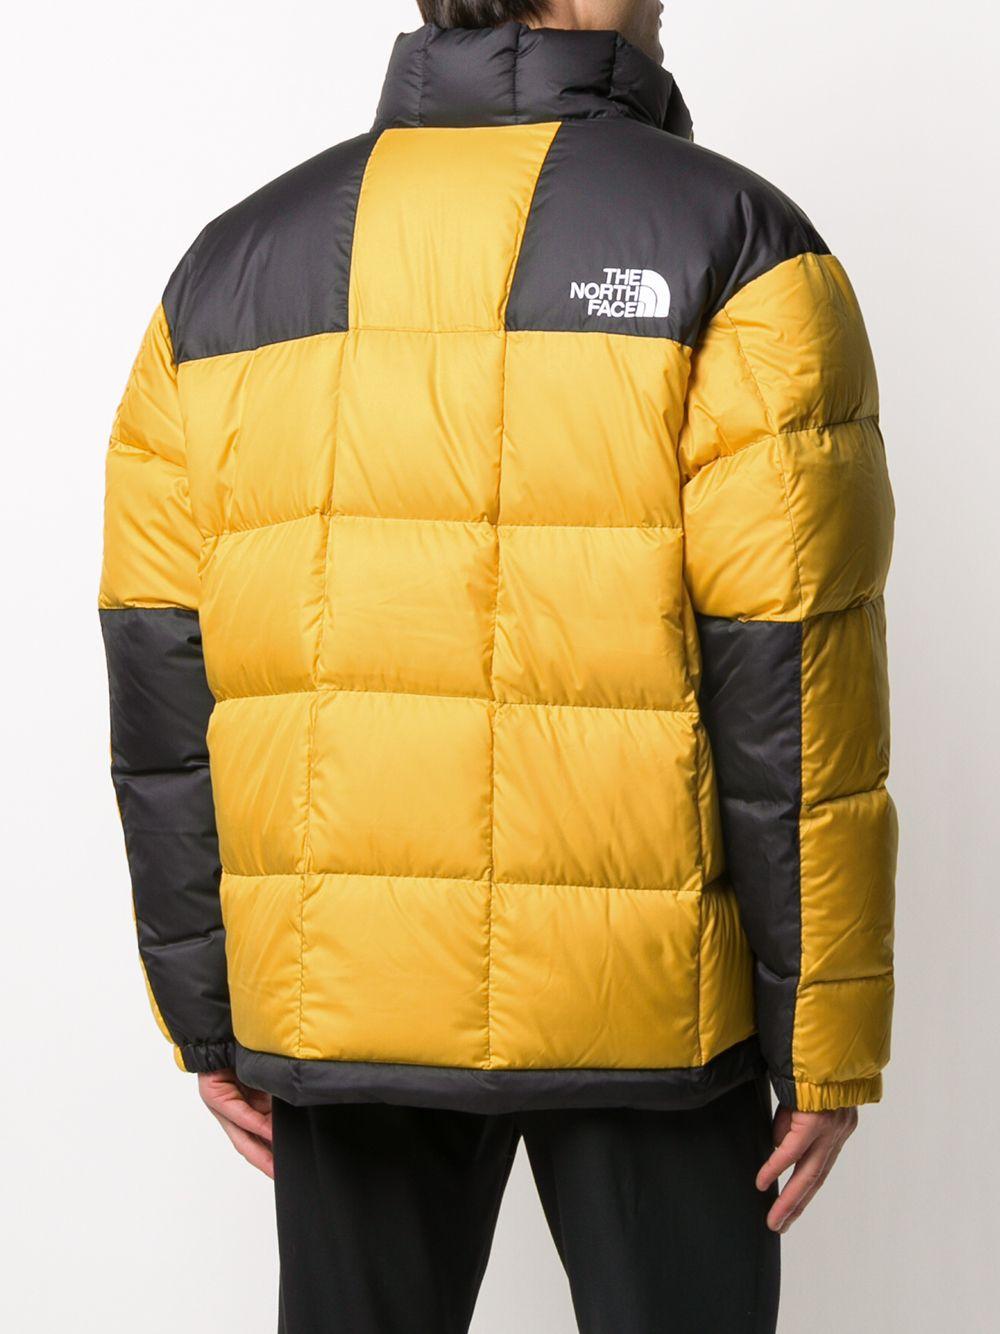 The North Face Quilted Puffer Coat in Yellow for Men - Lyst